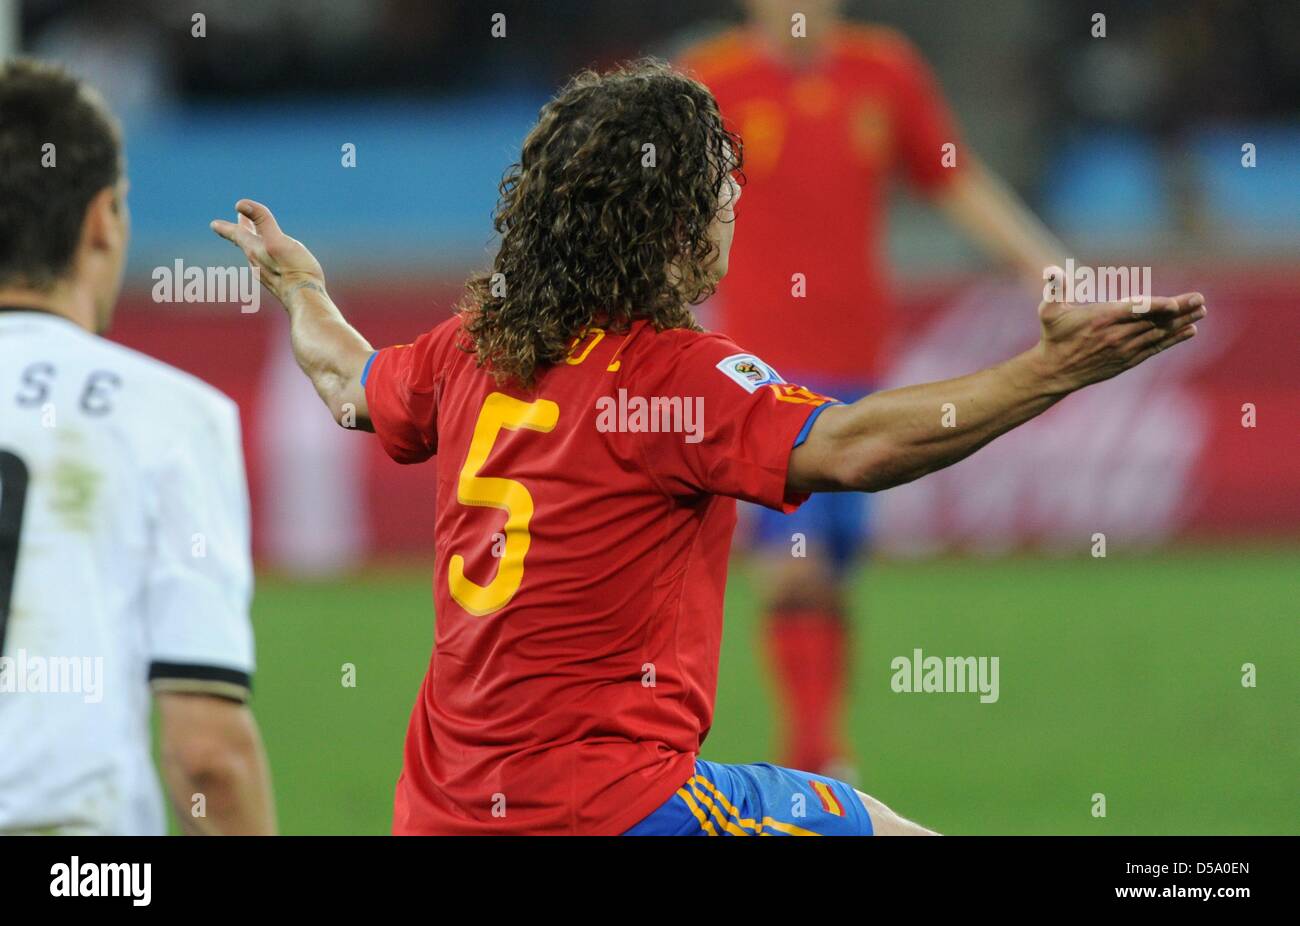 Spain's Carles Puyol gestures during the 2010 FIFA World Cup semi-final match between Germany and Spain at the Durban Stadium in Durban, South Africa 07 July 2010. Spain won 1-0. Photo: Marcus Brandt dpa - Please refer to http://dpaq.de/FIFA-WM2010-TC Stock Photo